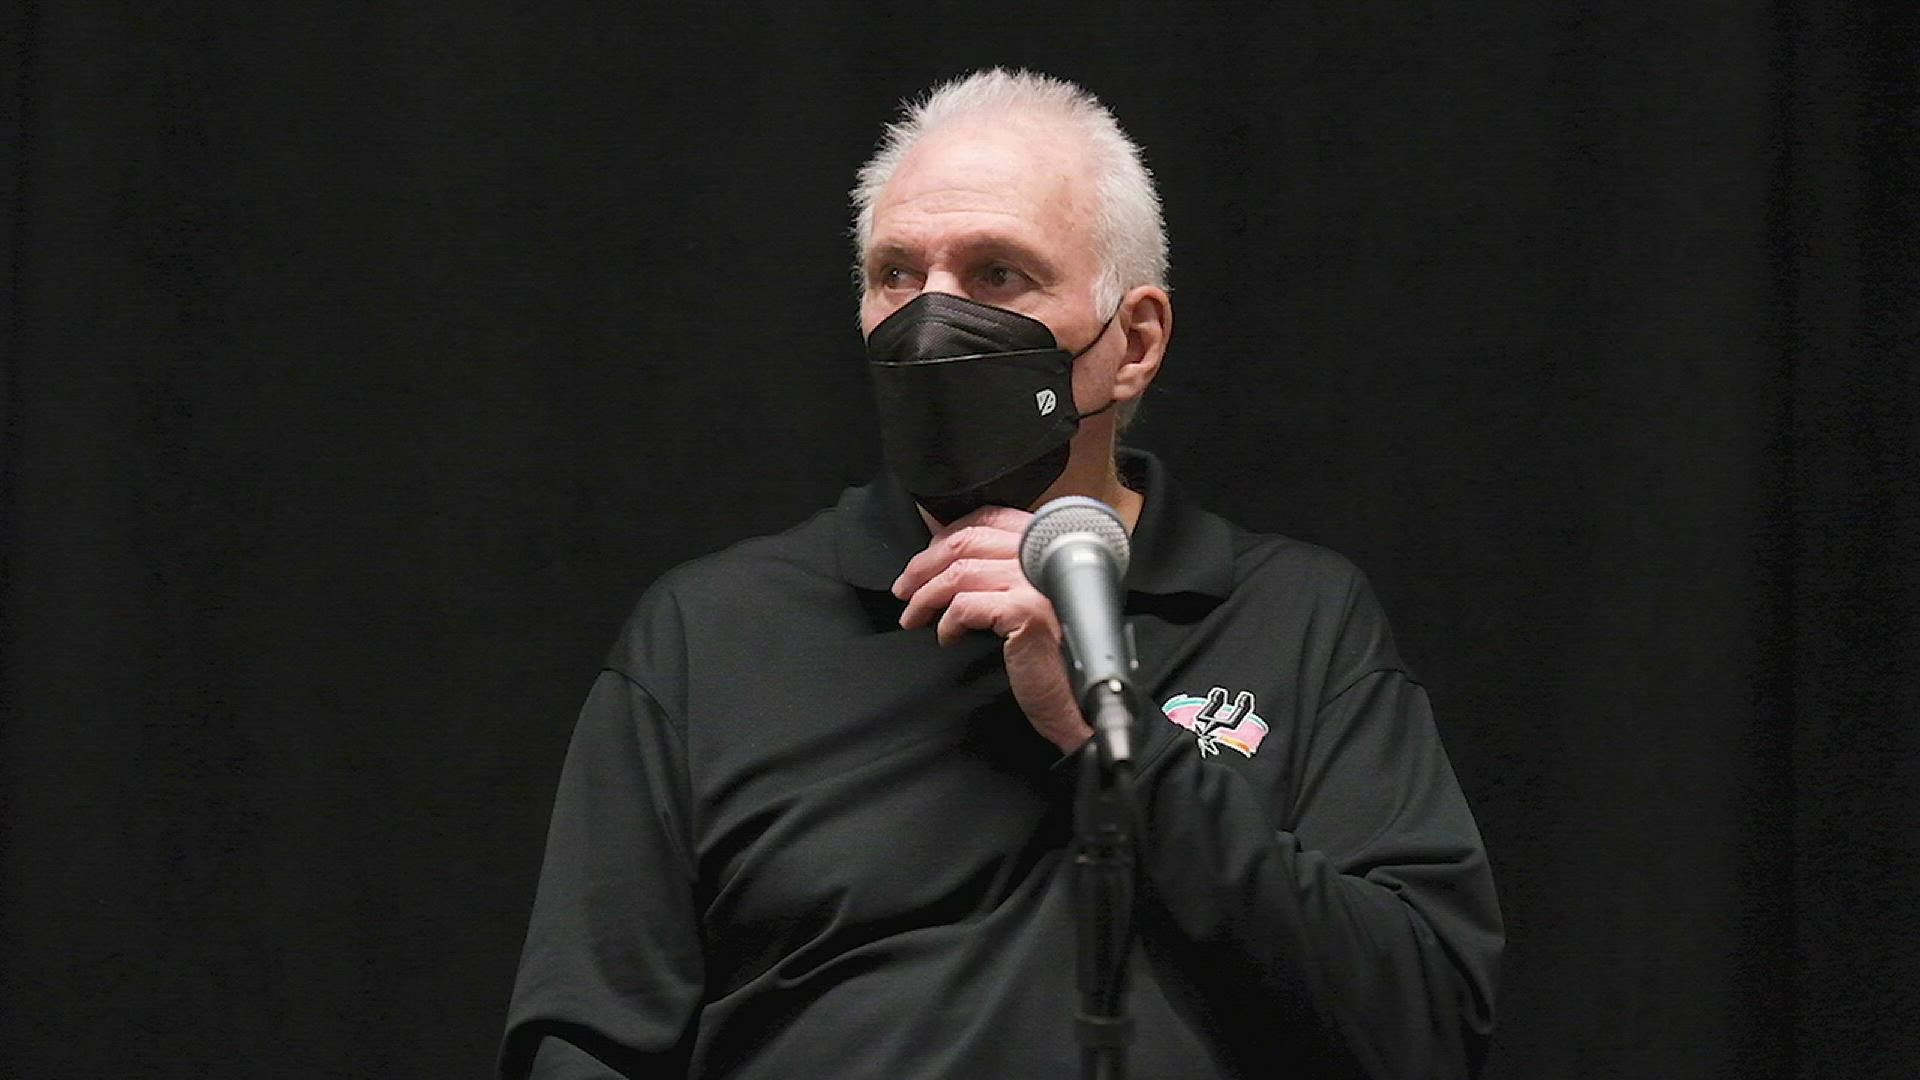 "I was proud of them, thought they did a great job," Popovich says, calling this a learning experience and saying he was most excited about the fight and effort.